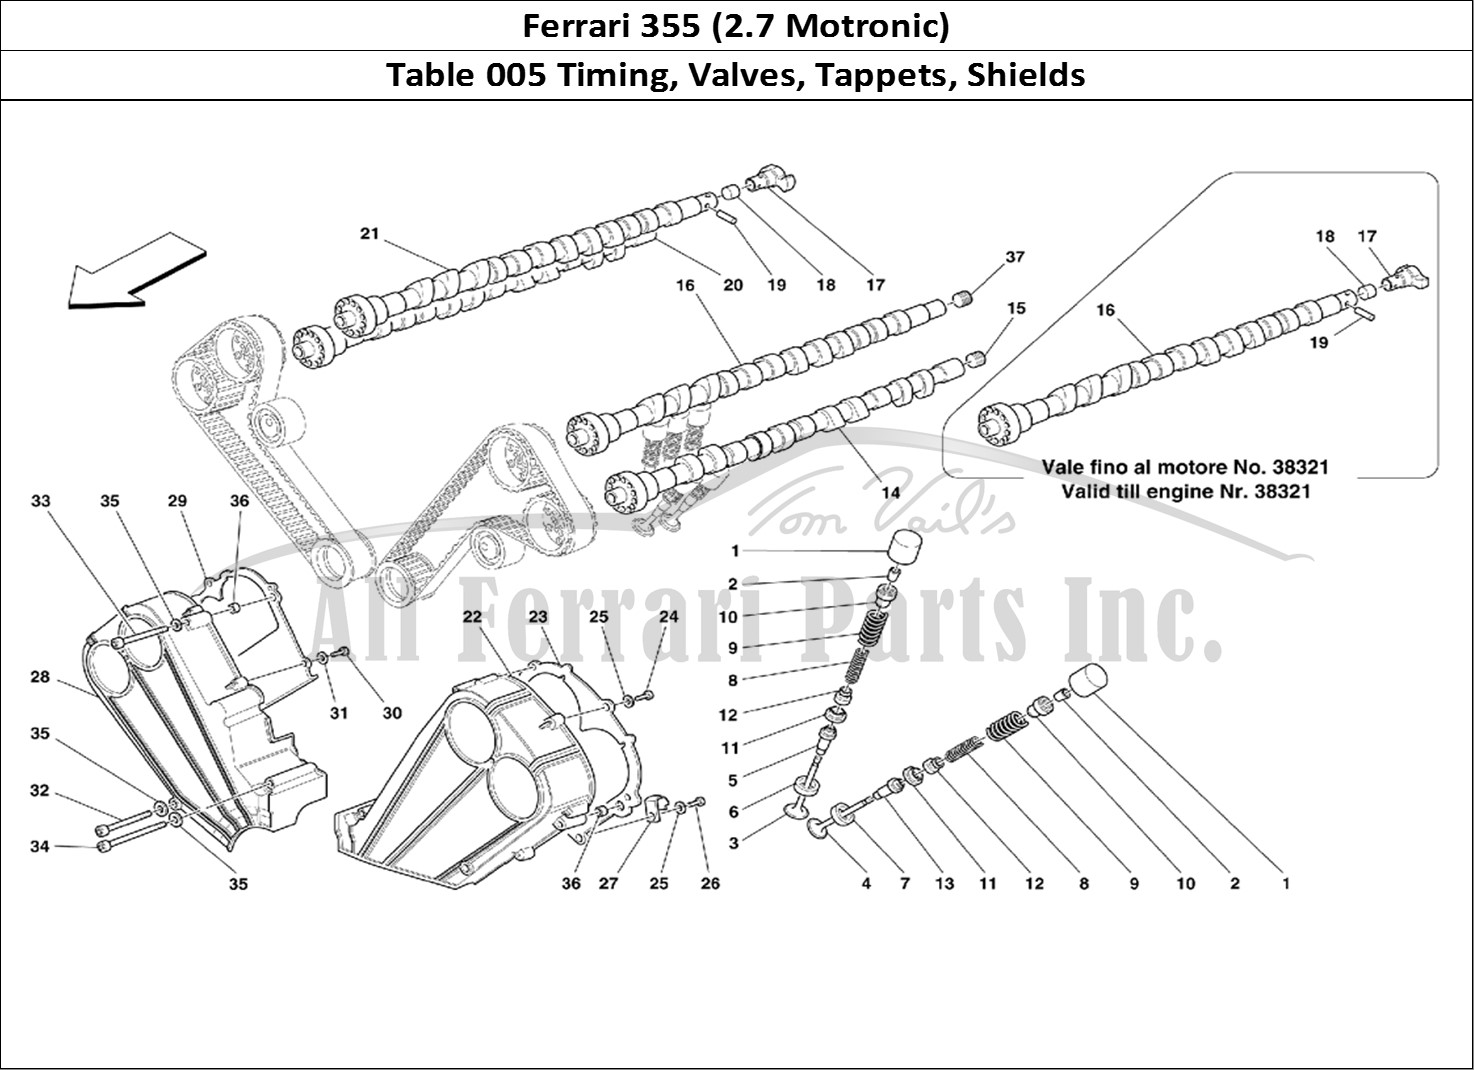 Ferrari Parts Ferrari 355 (2.7 Motronic) Page 005 Timing - Tappets and Shie